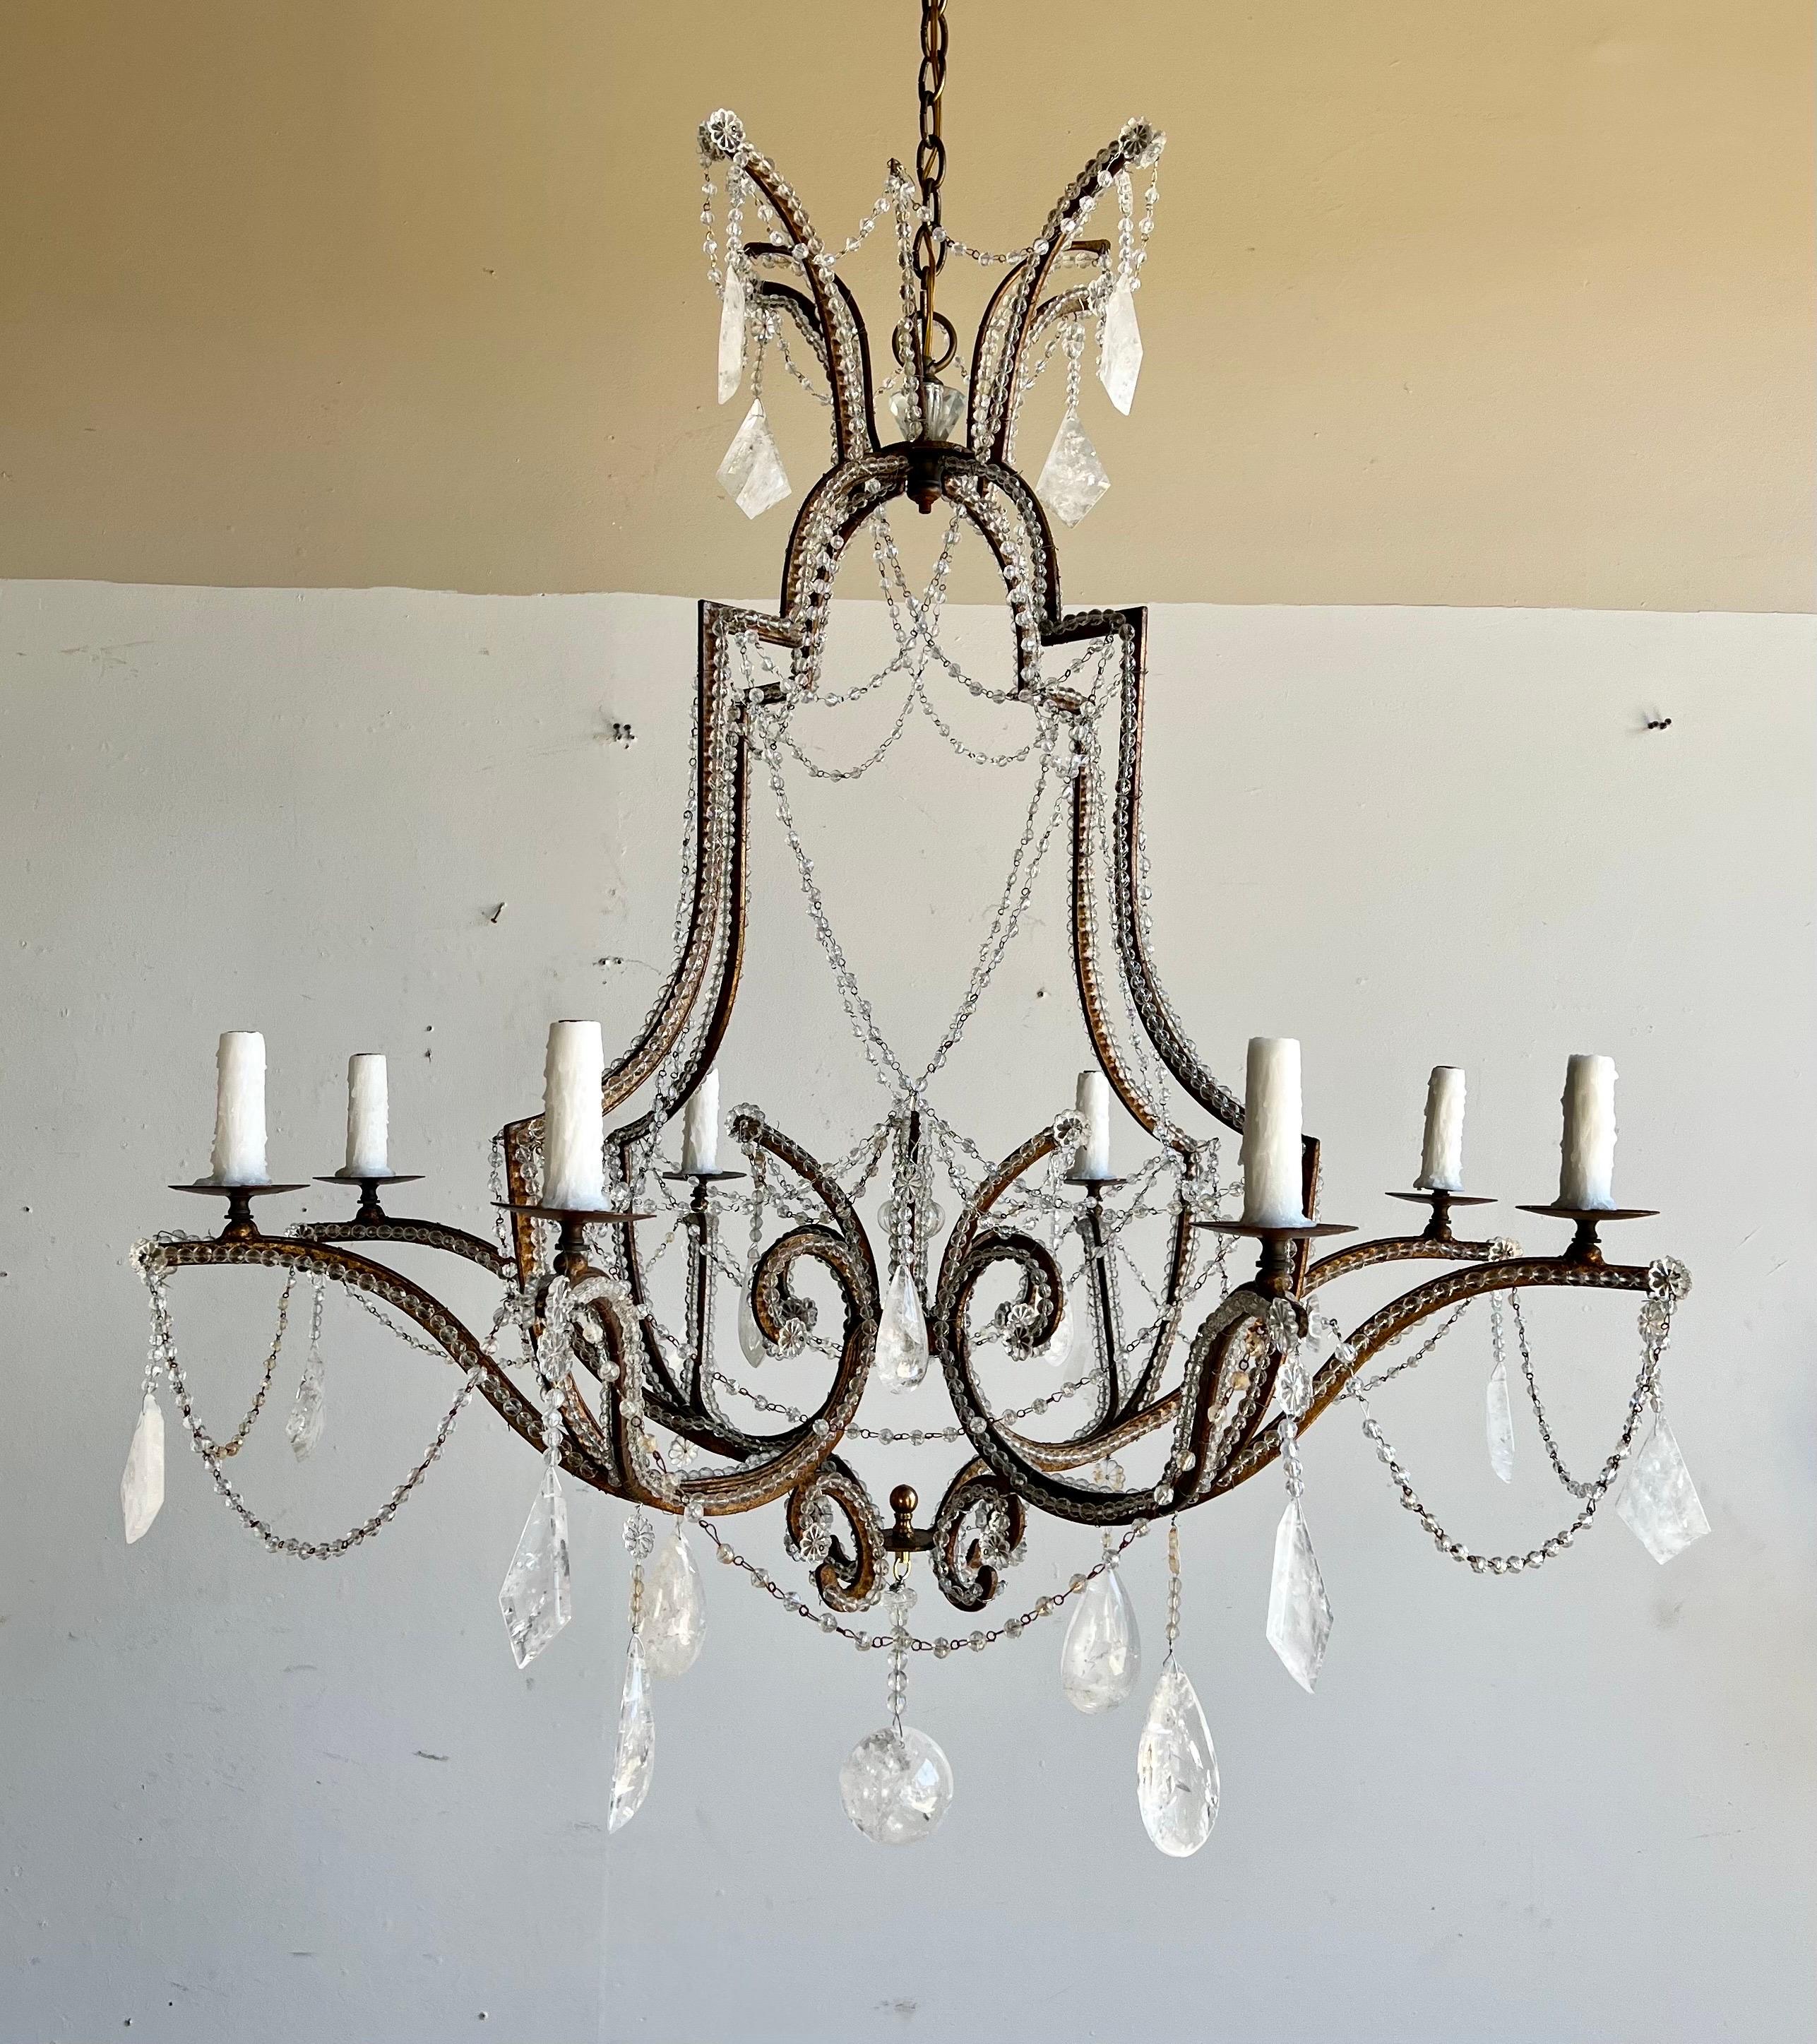 Monumental (10) light beaded wrought iron & rock crystal chandelier. The chandelier is adorned with garlands of beads and both almond & kite shaped rock crystals throughout. The chandelier is newly rewired with drip wax candle covers. Includes both